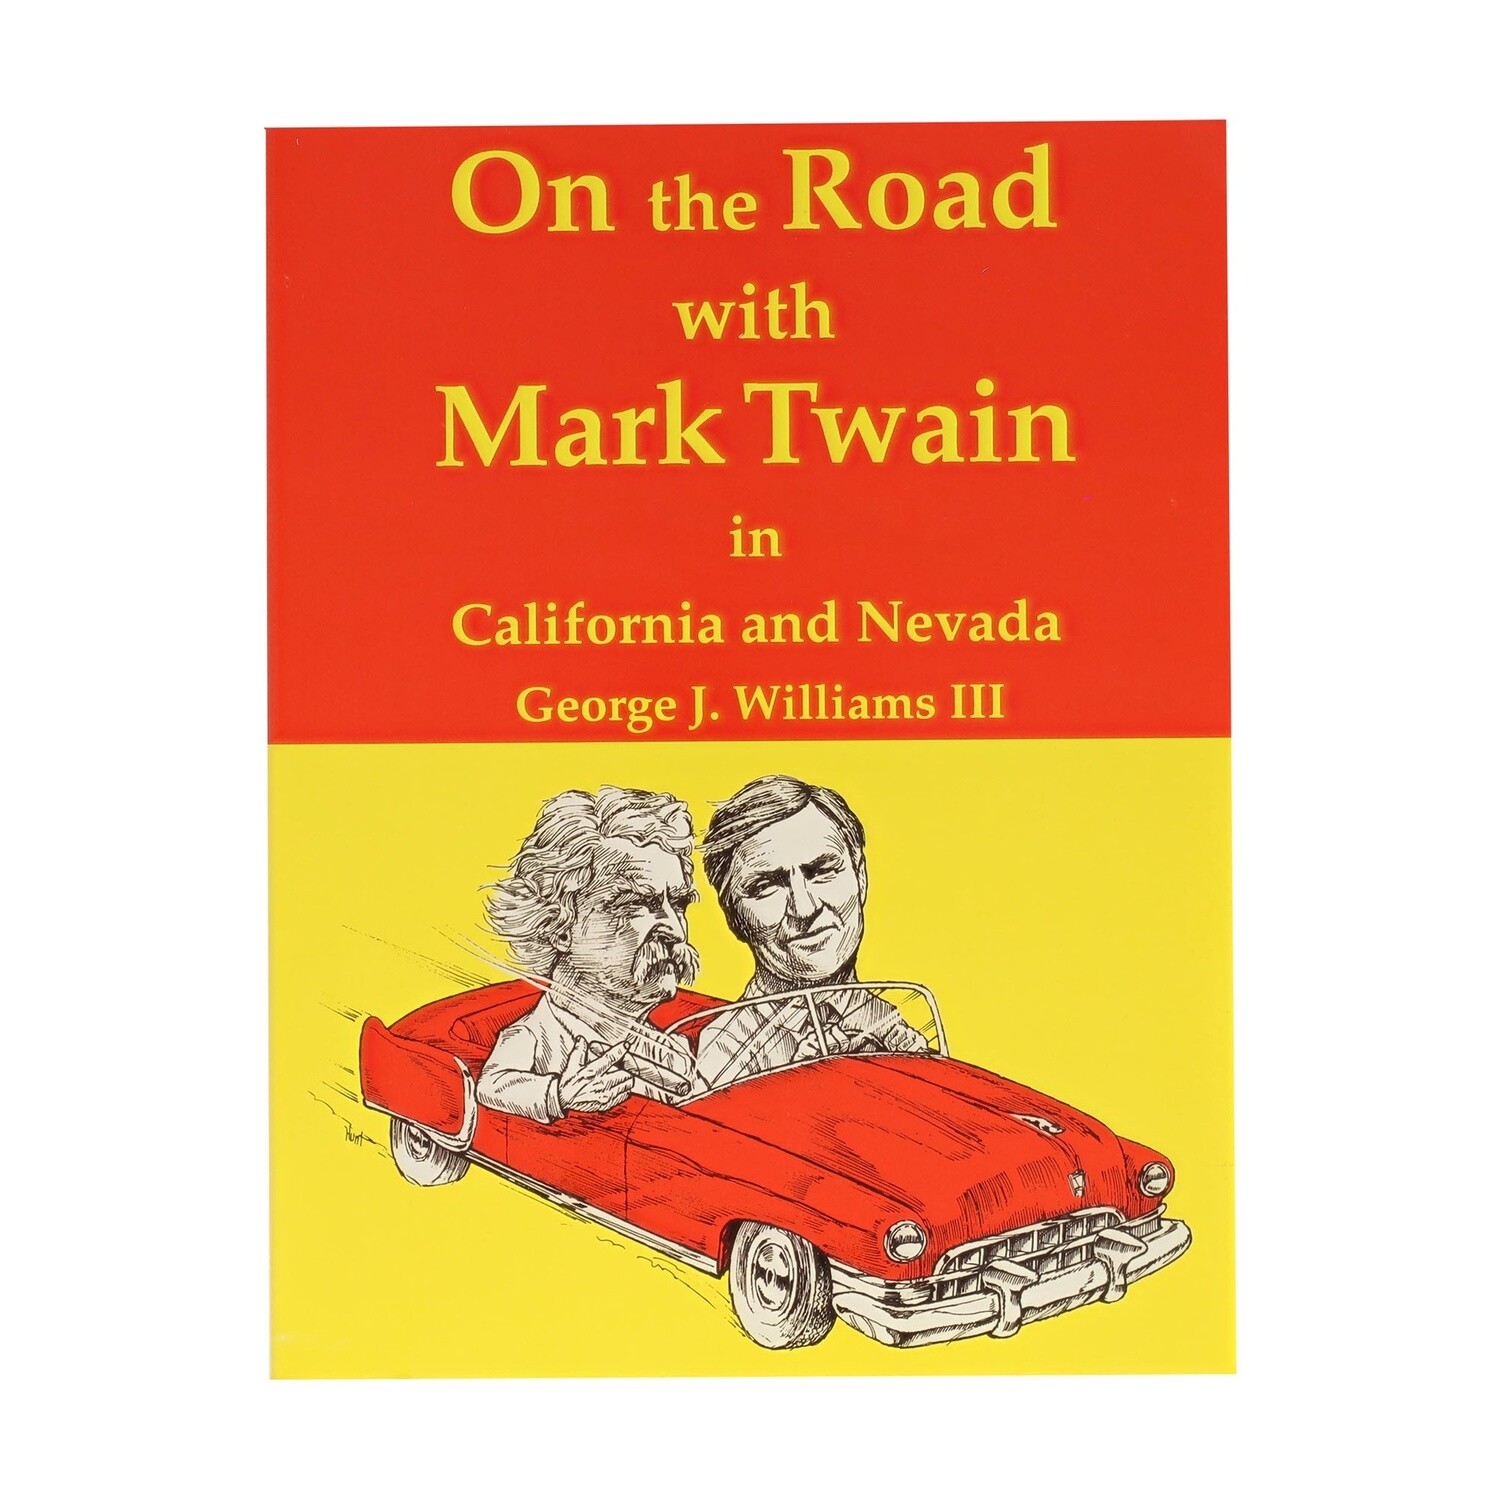 On the Road with Mark Twain in California and Nevada by George J. Williams III